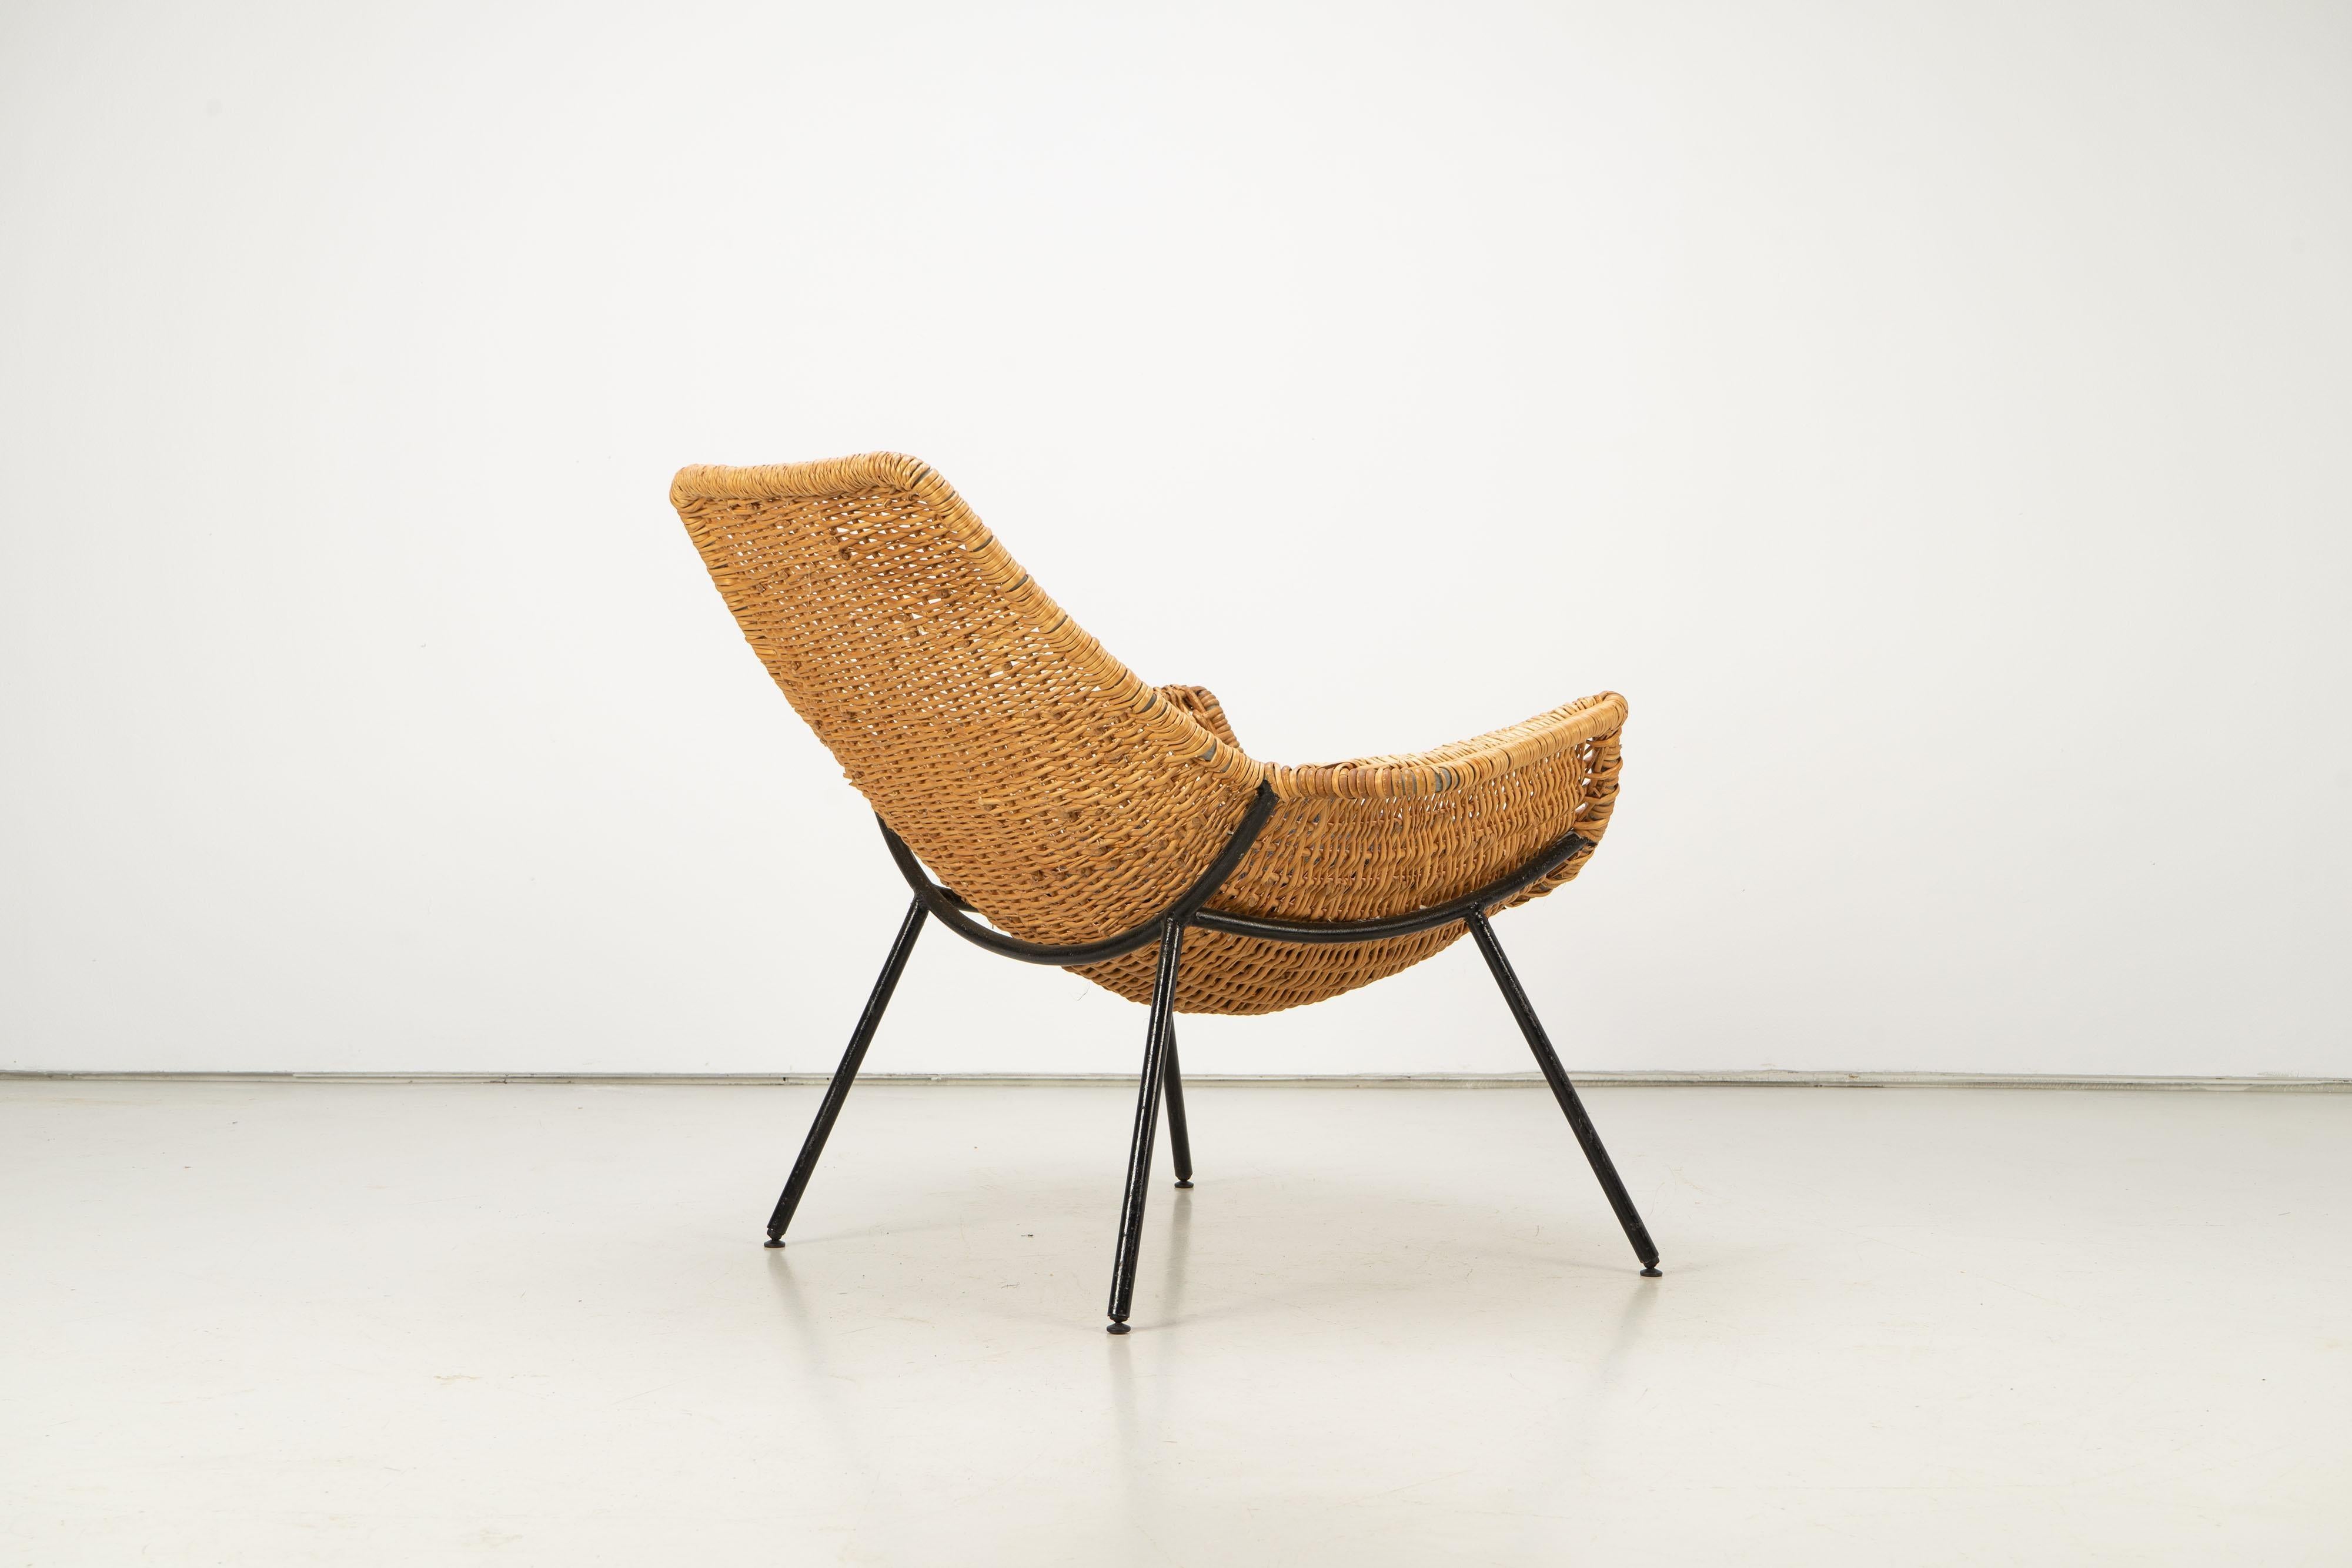 Steel Mid-Century Modern Rattan Lounge Chair by Giancarlo De Carlo, Italy, 1954 For Sale